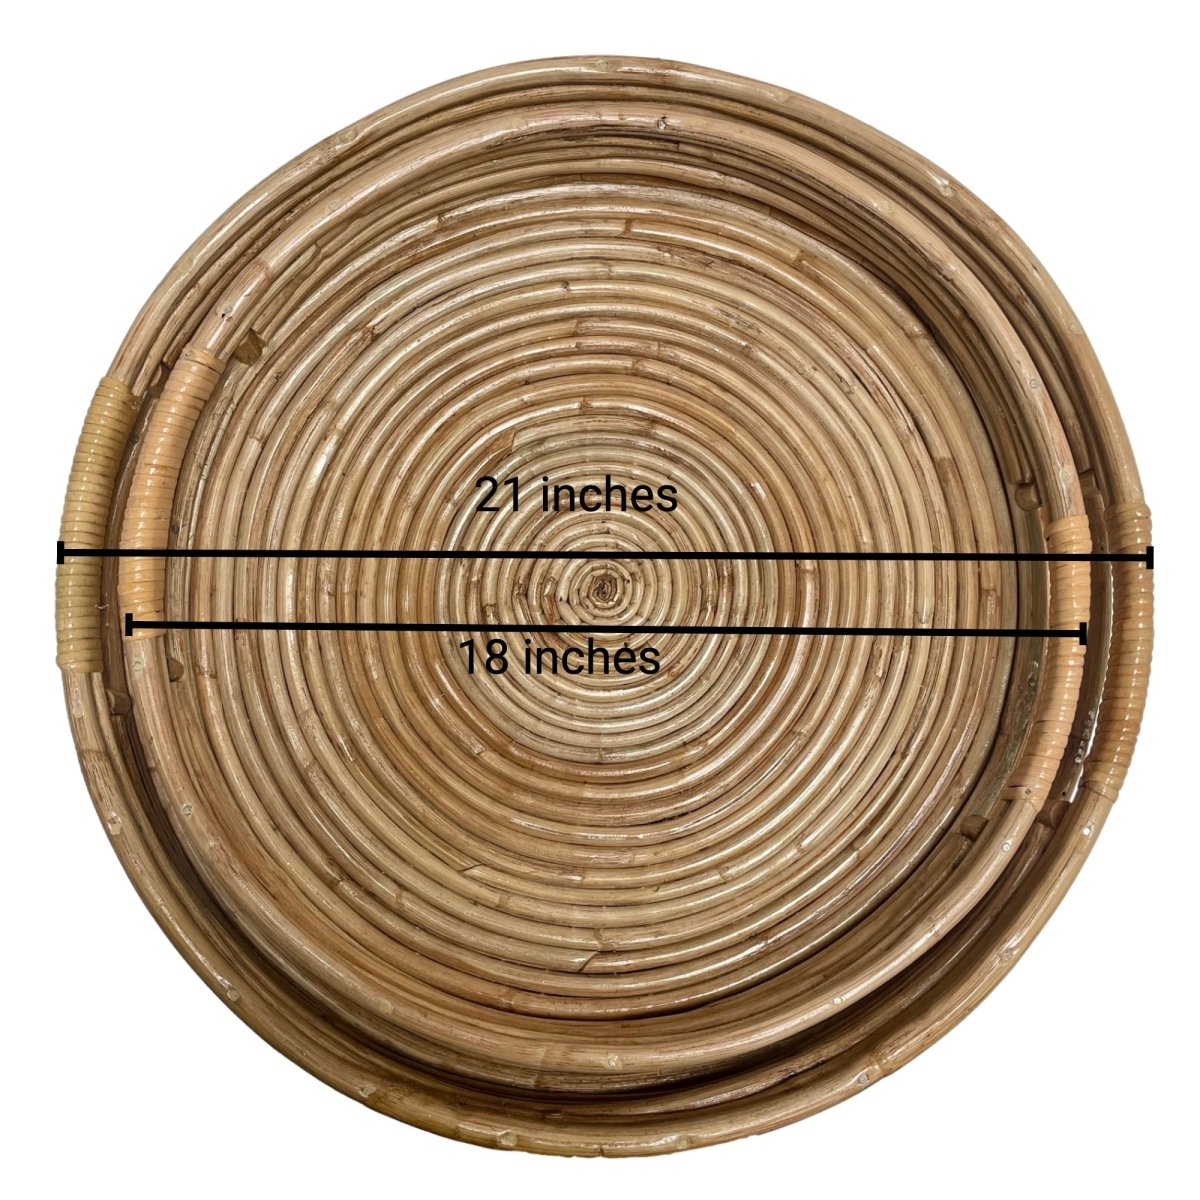 Verres Set of 2 Rattan Round Tray with Handles - Rustic Furniture Outlet